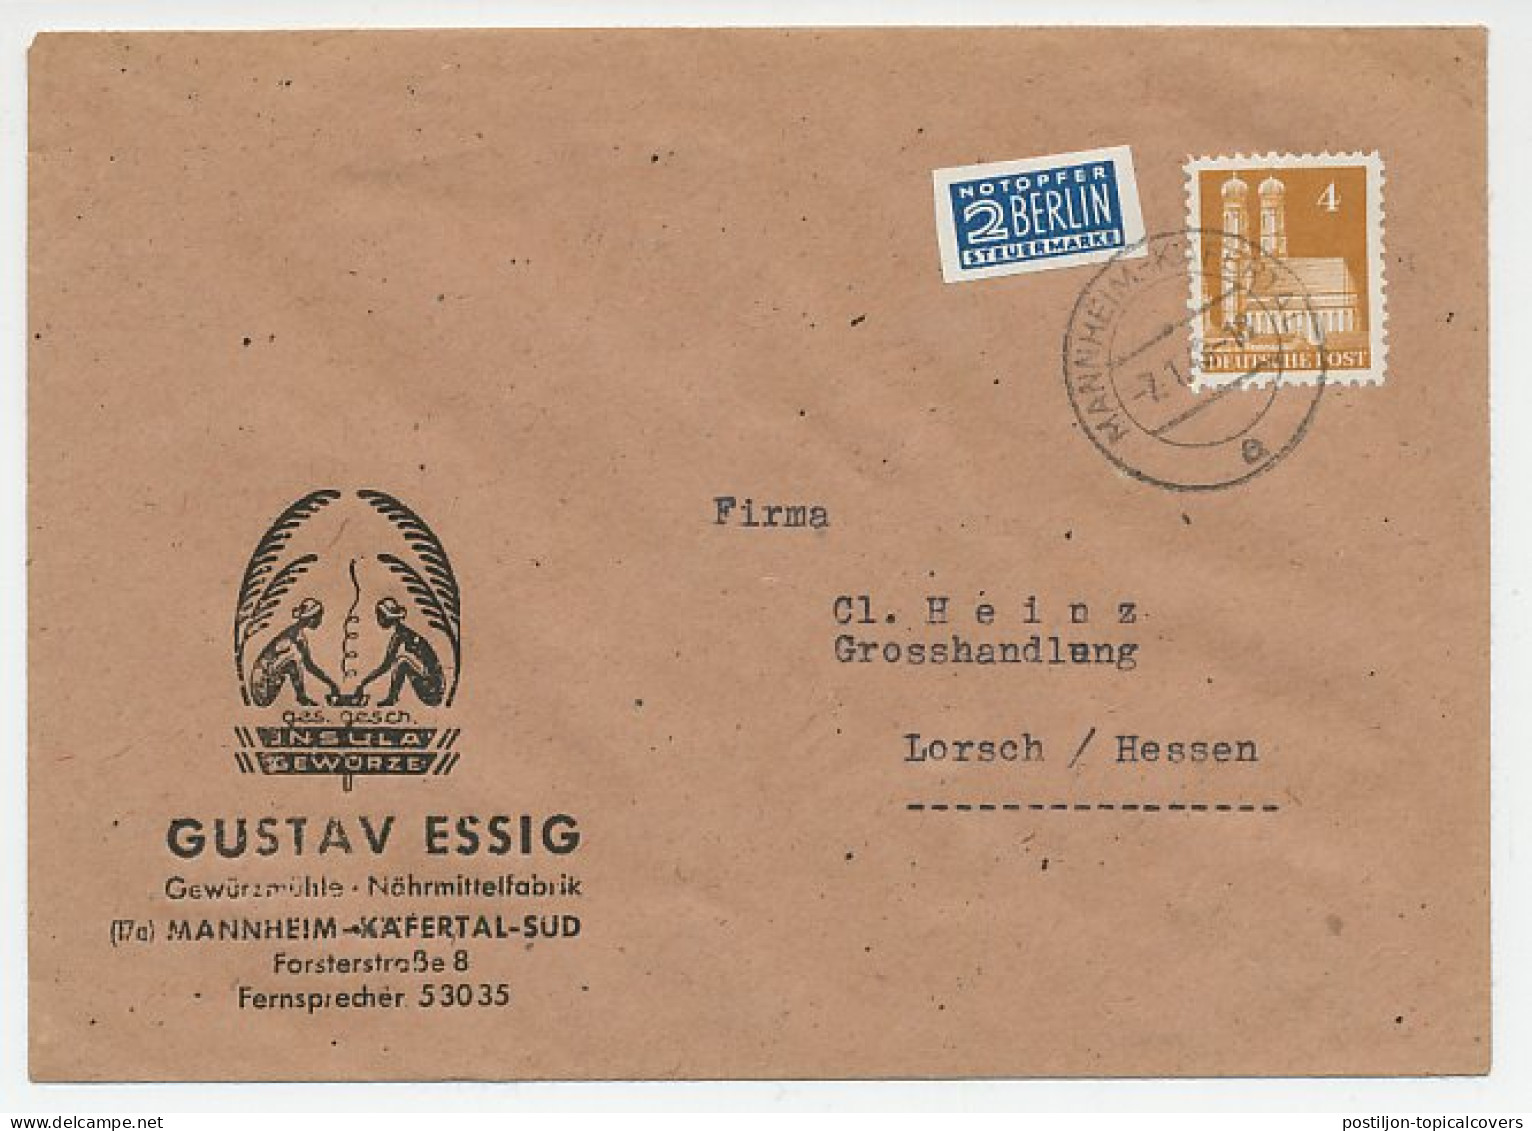 Illustrated Cover Deutsche Post / Germany 1949 Insula - Island - Spices - Indianen